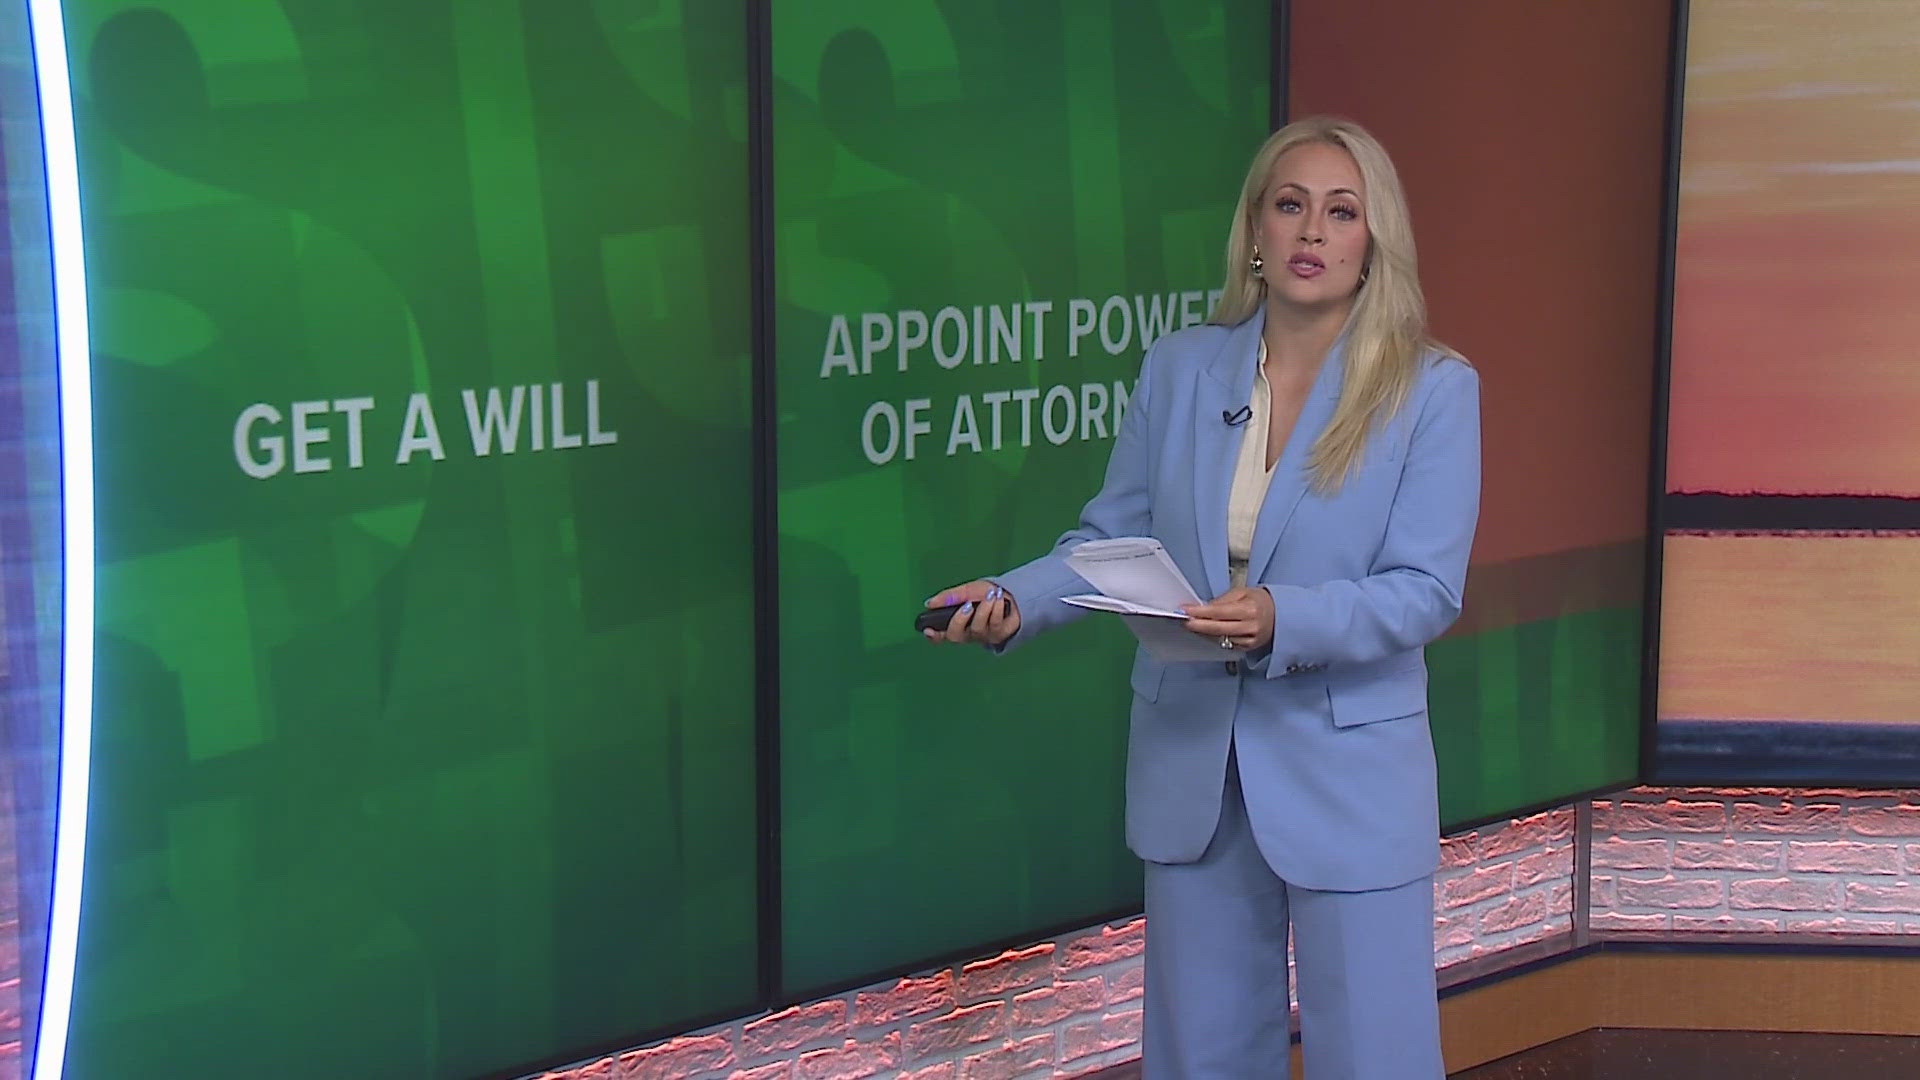 WWL Louisiana's Brheanna Boudreaux has tips to plan your Will in today's Money Moment.